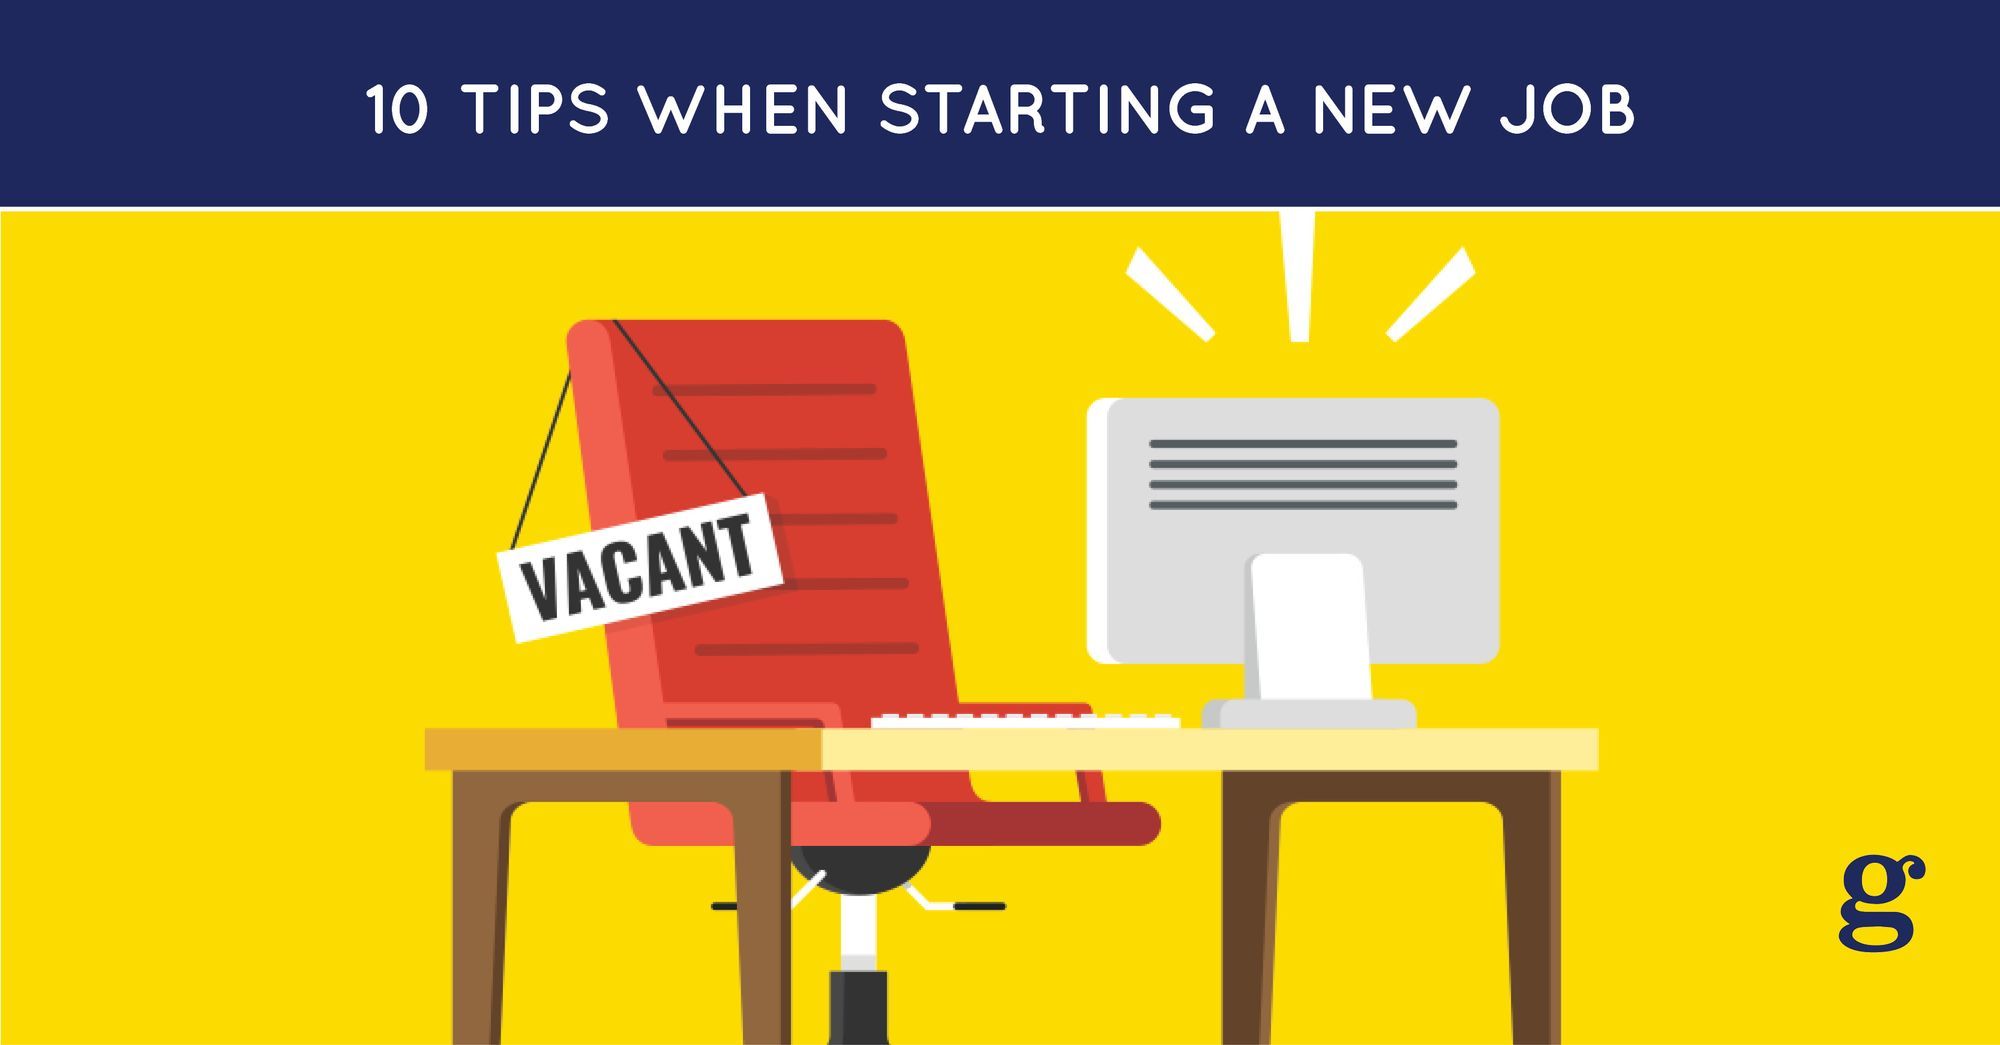 10 Tips when starting a new job